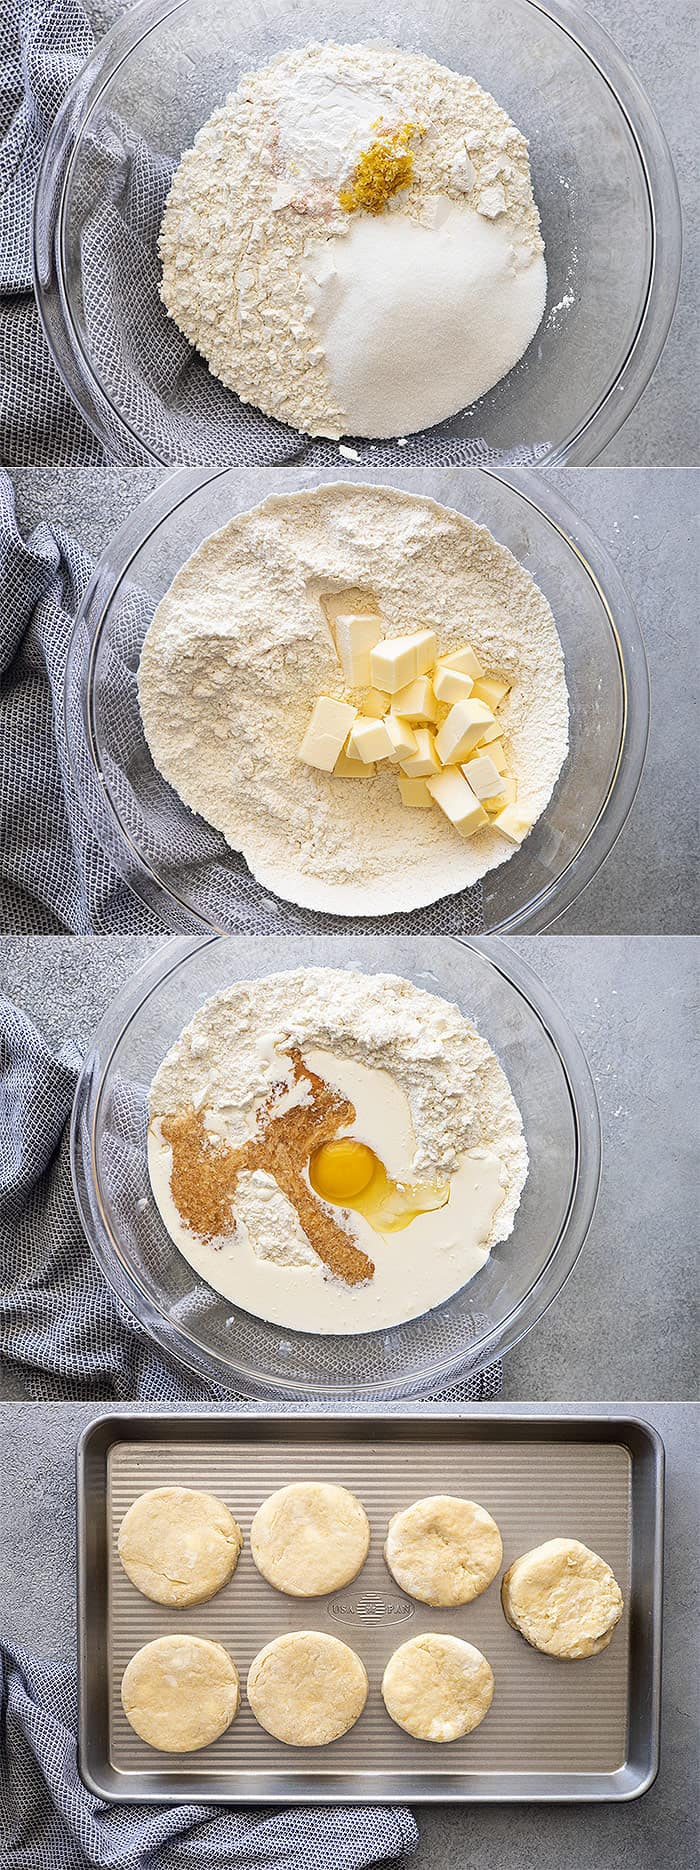 Four pictures showing how to make the sweet biscuits.